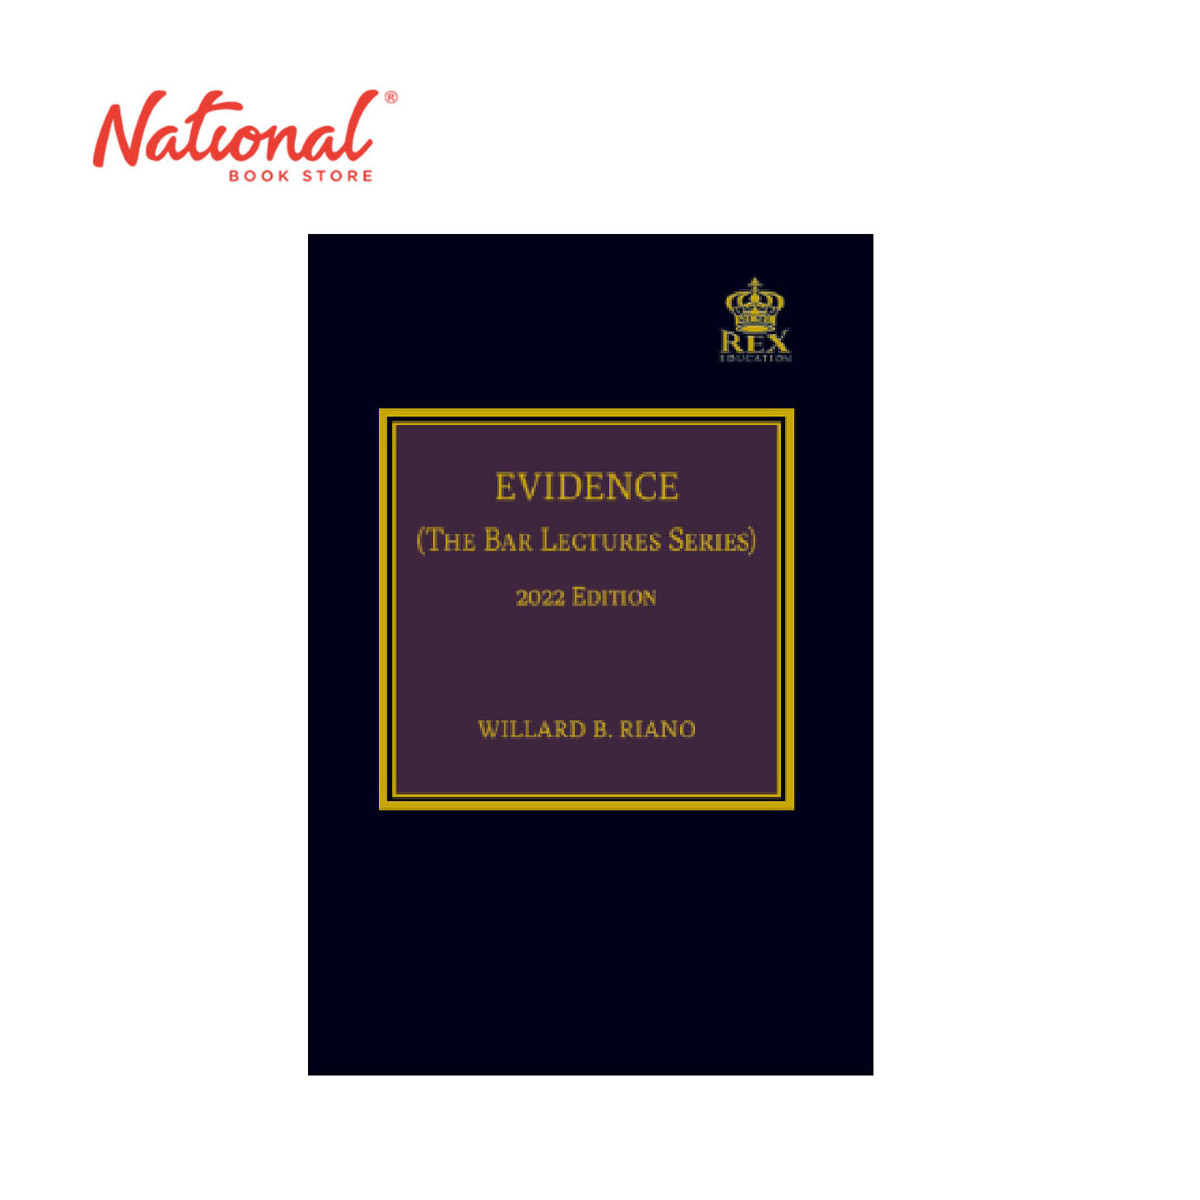 Evidence (The Bar Lectures Series) (2022 Edition) by Atty. Williard B. Riano - Hardcover - Law Books